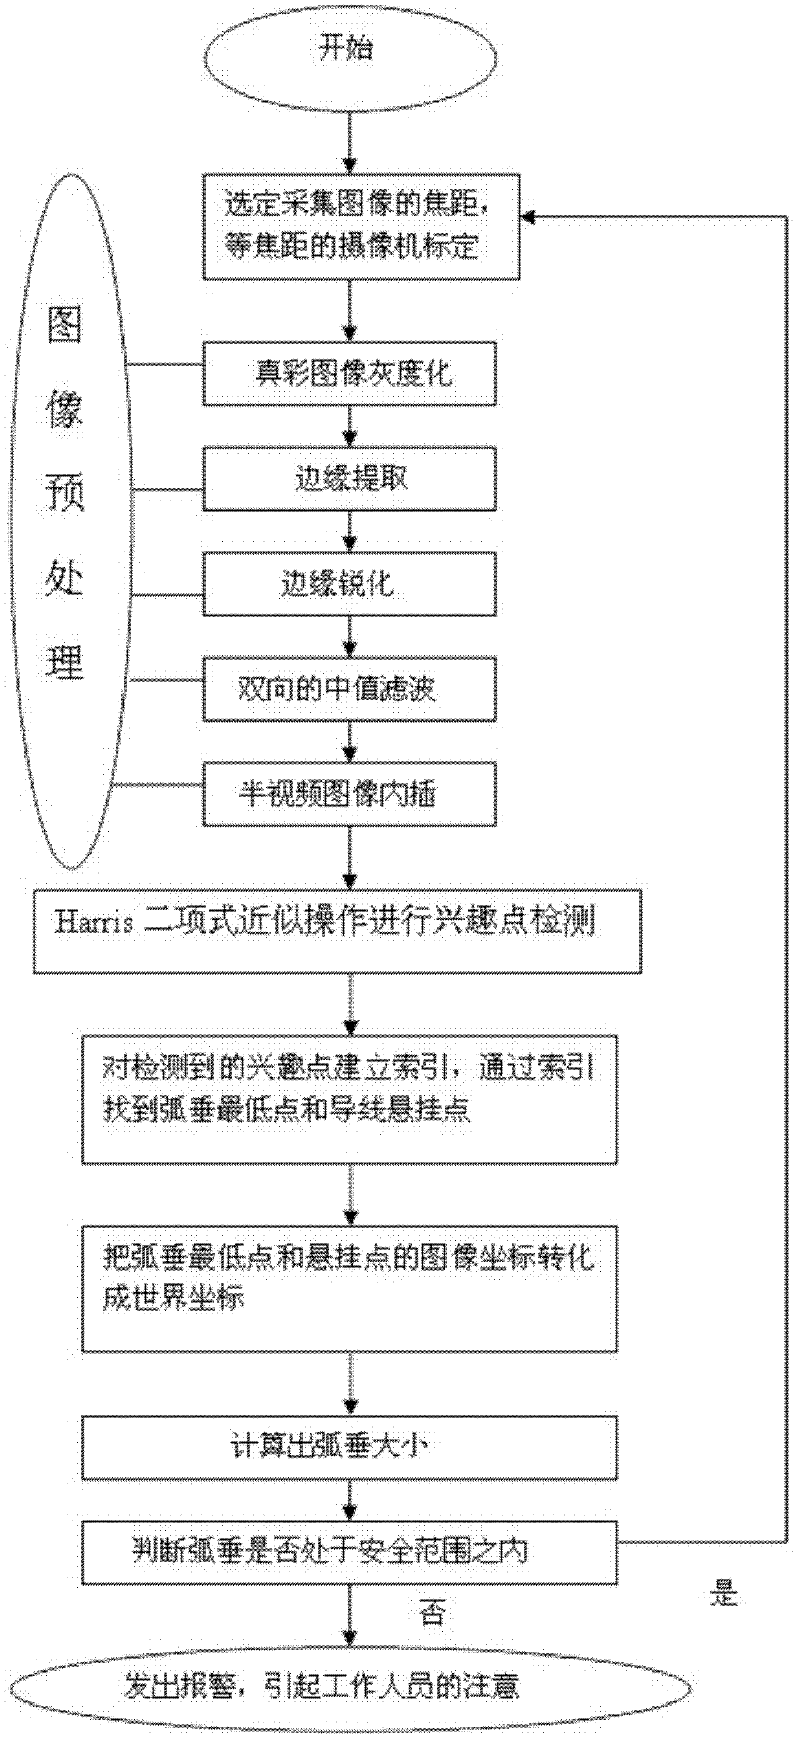 Method for measuring arc sag of wire of power transmission line based on image processing